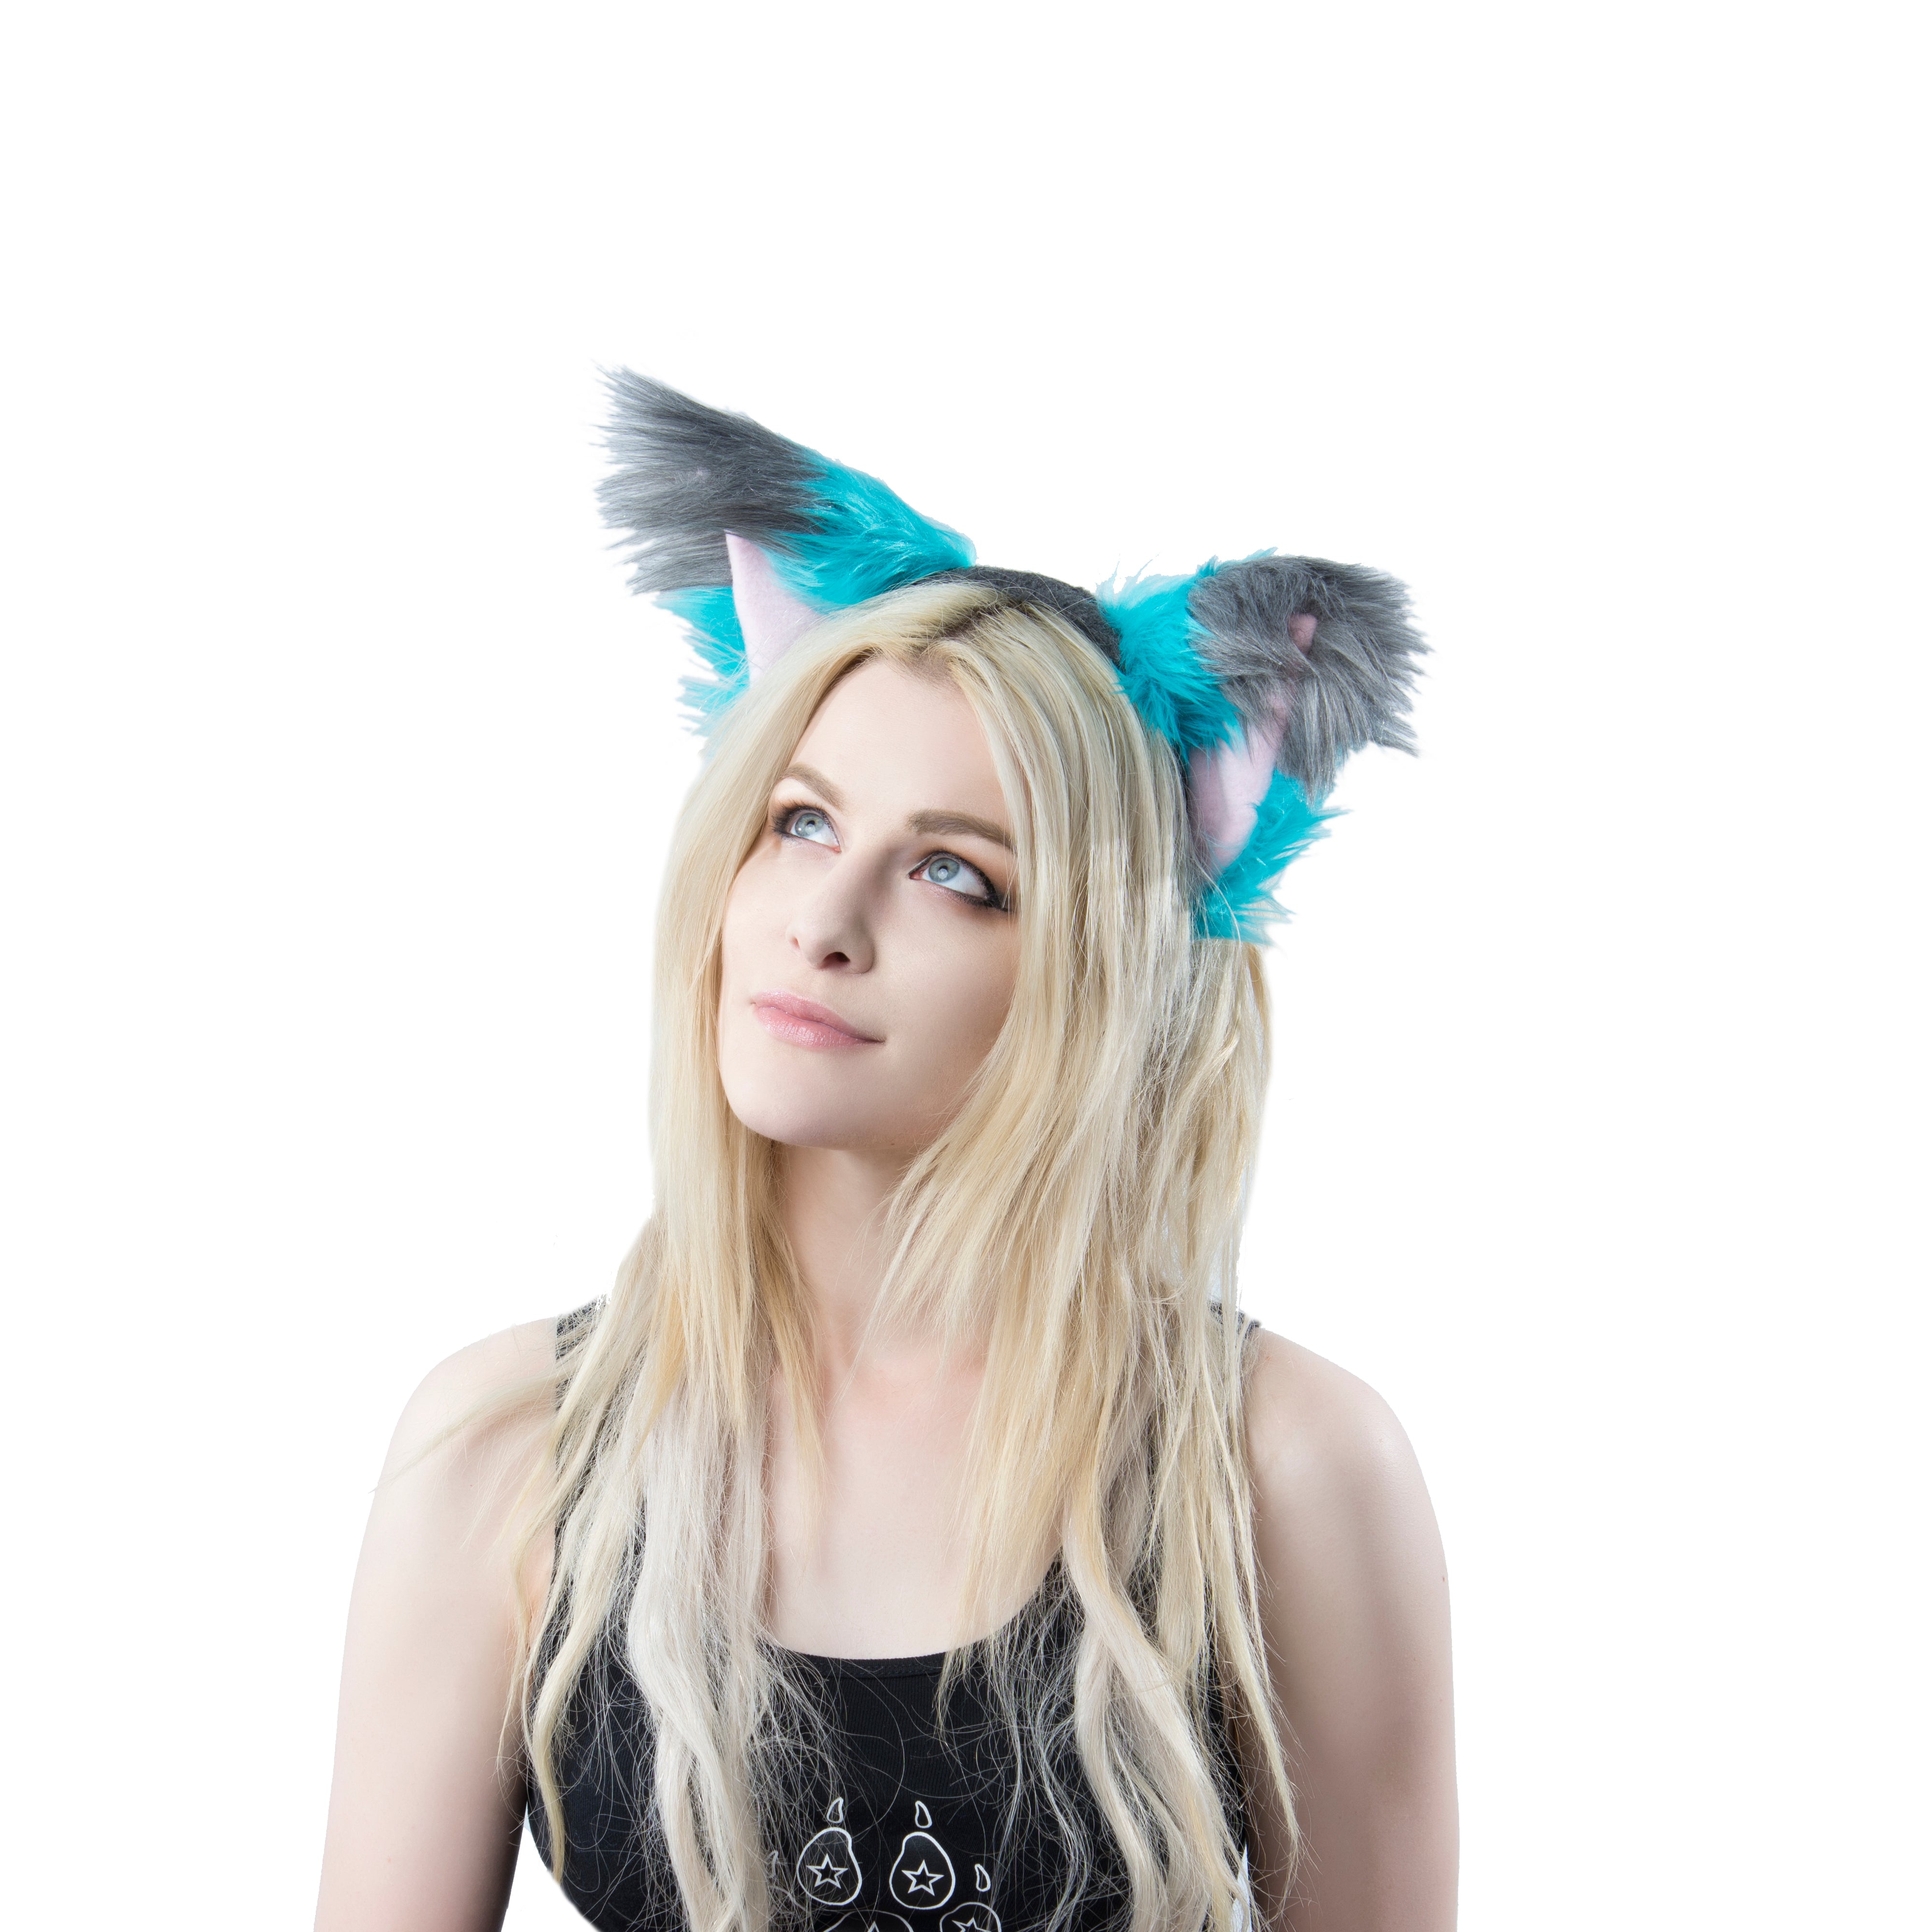 Pawstar cheshire fox or cat ear headand from alice in wonderland furry fluffy partial fursuit halloween costume or cosplay accessory